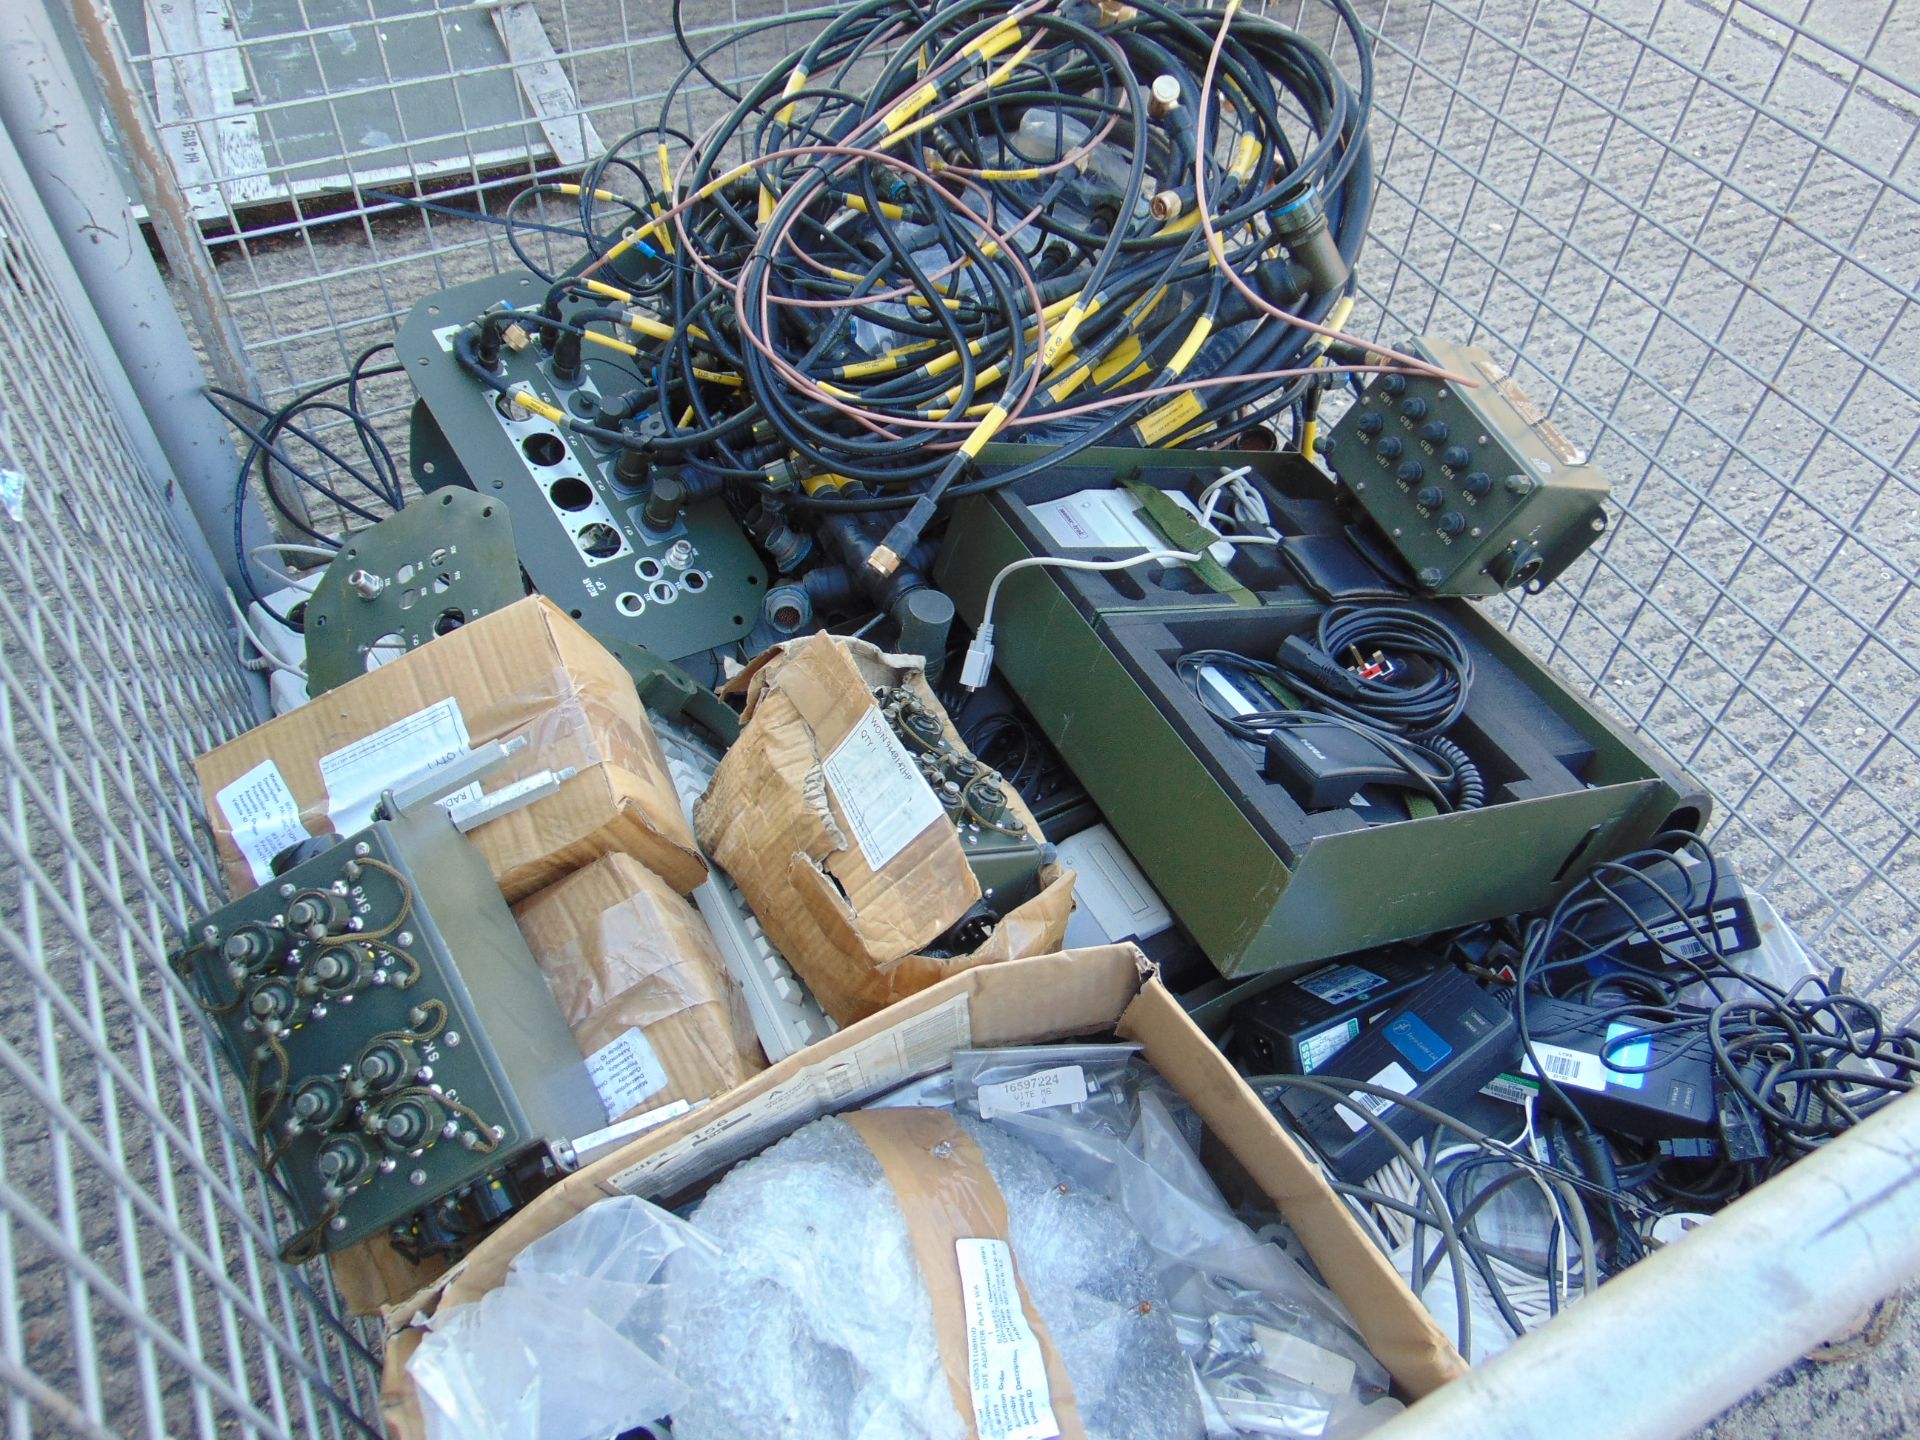 1 x Stillage of Comms Equipment and Spares, Cables etc - Image 6 of 7